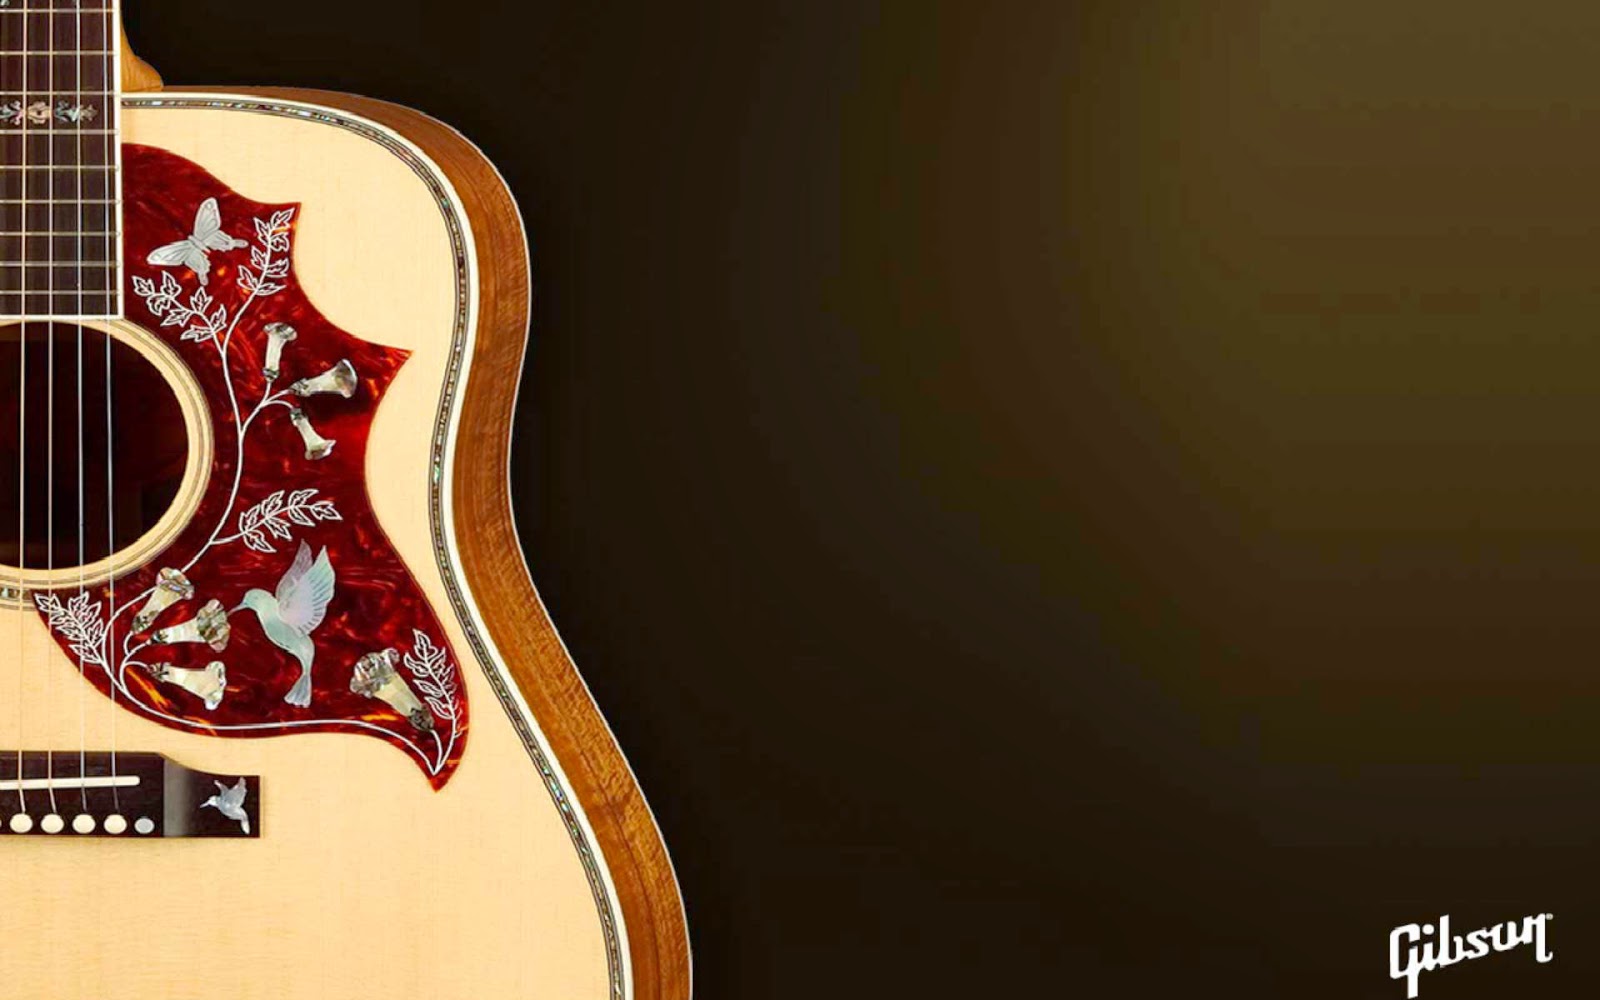 GibSon AcouStic GuiTar WalLpaPer hd 1920x1200 Download Wallpaper For